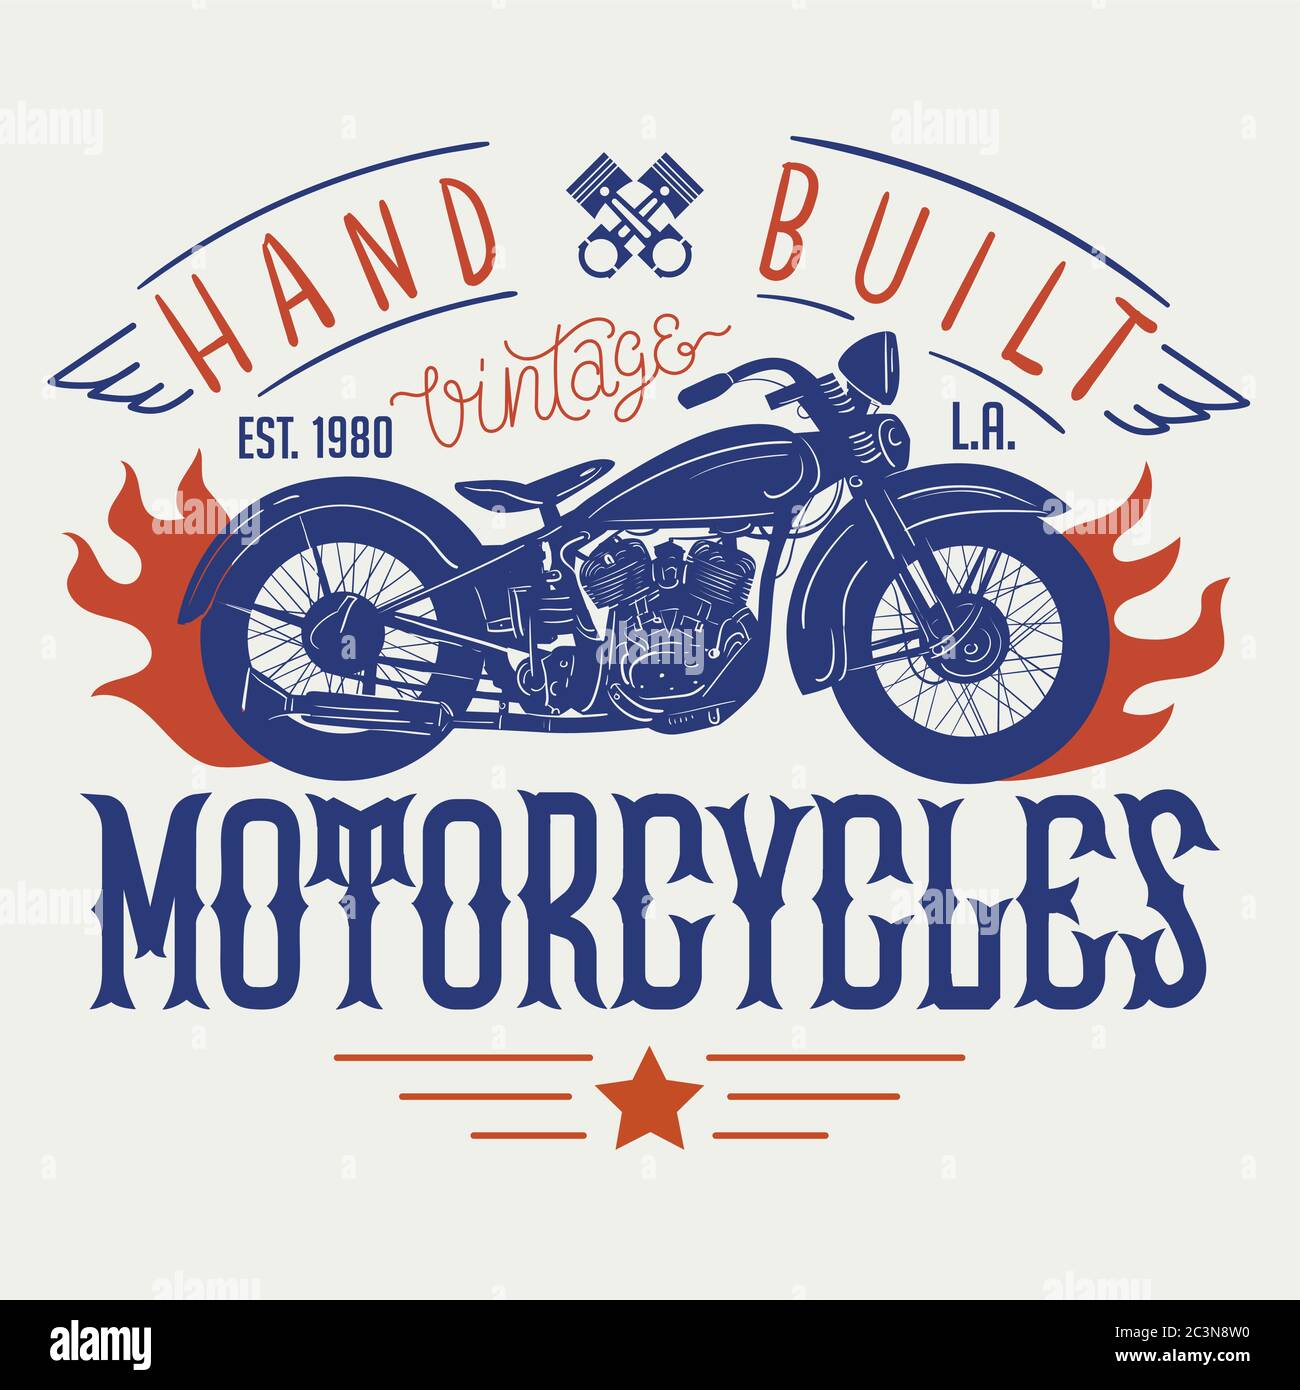 Hand built vintage motorcycles. T-shirt or poster design with an illustration of an old motorcycle Stock Vector